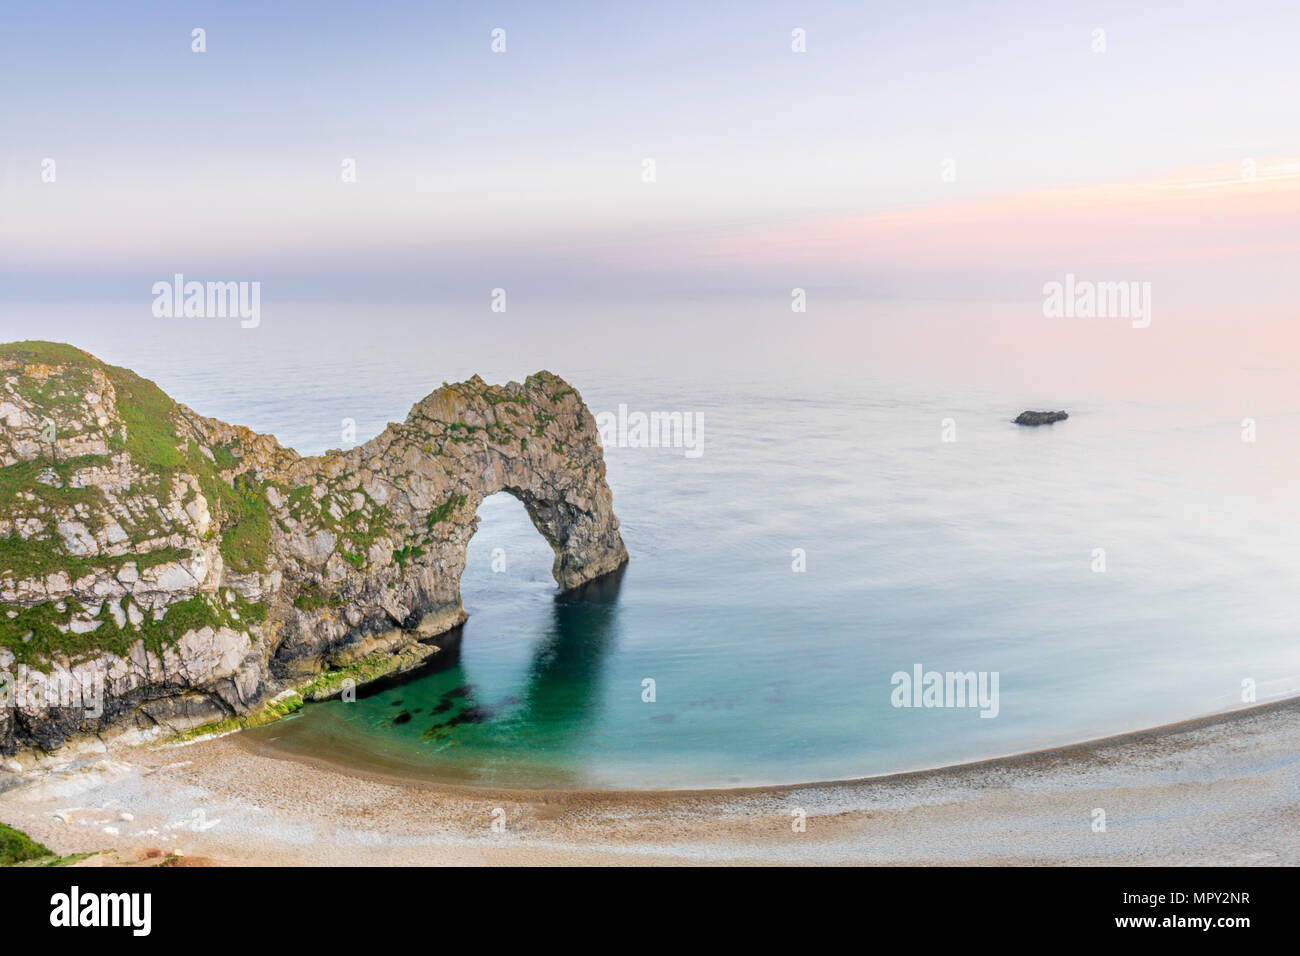 The famous arch rock formation at Durdle Door along the Jurassic Coast basked in sunset light, UNESCO Natural World Heritage Site, Dorset, England, UK Stock Photo